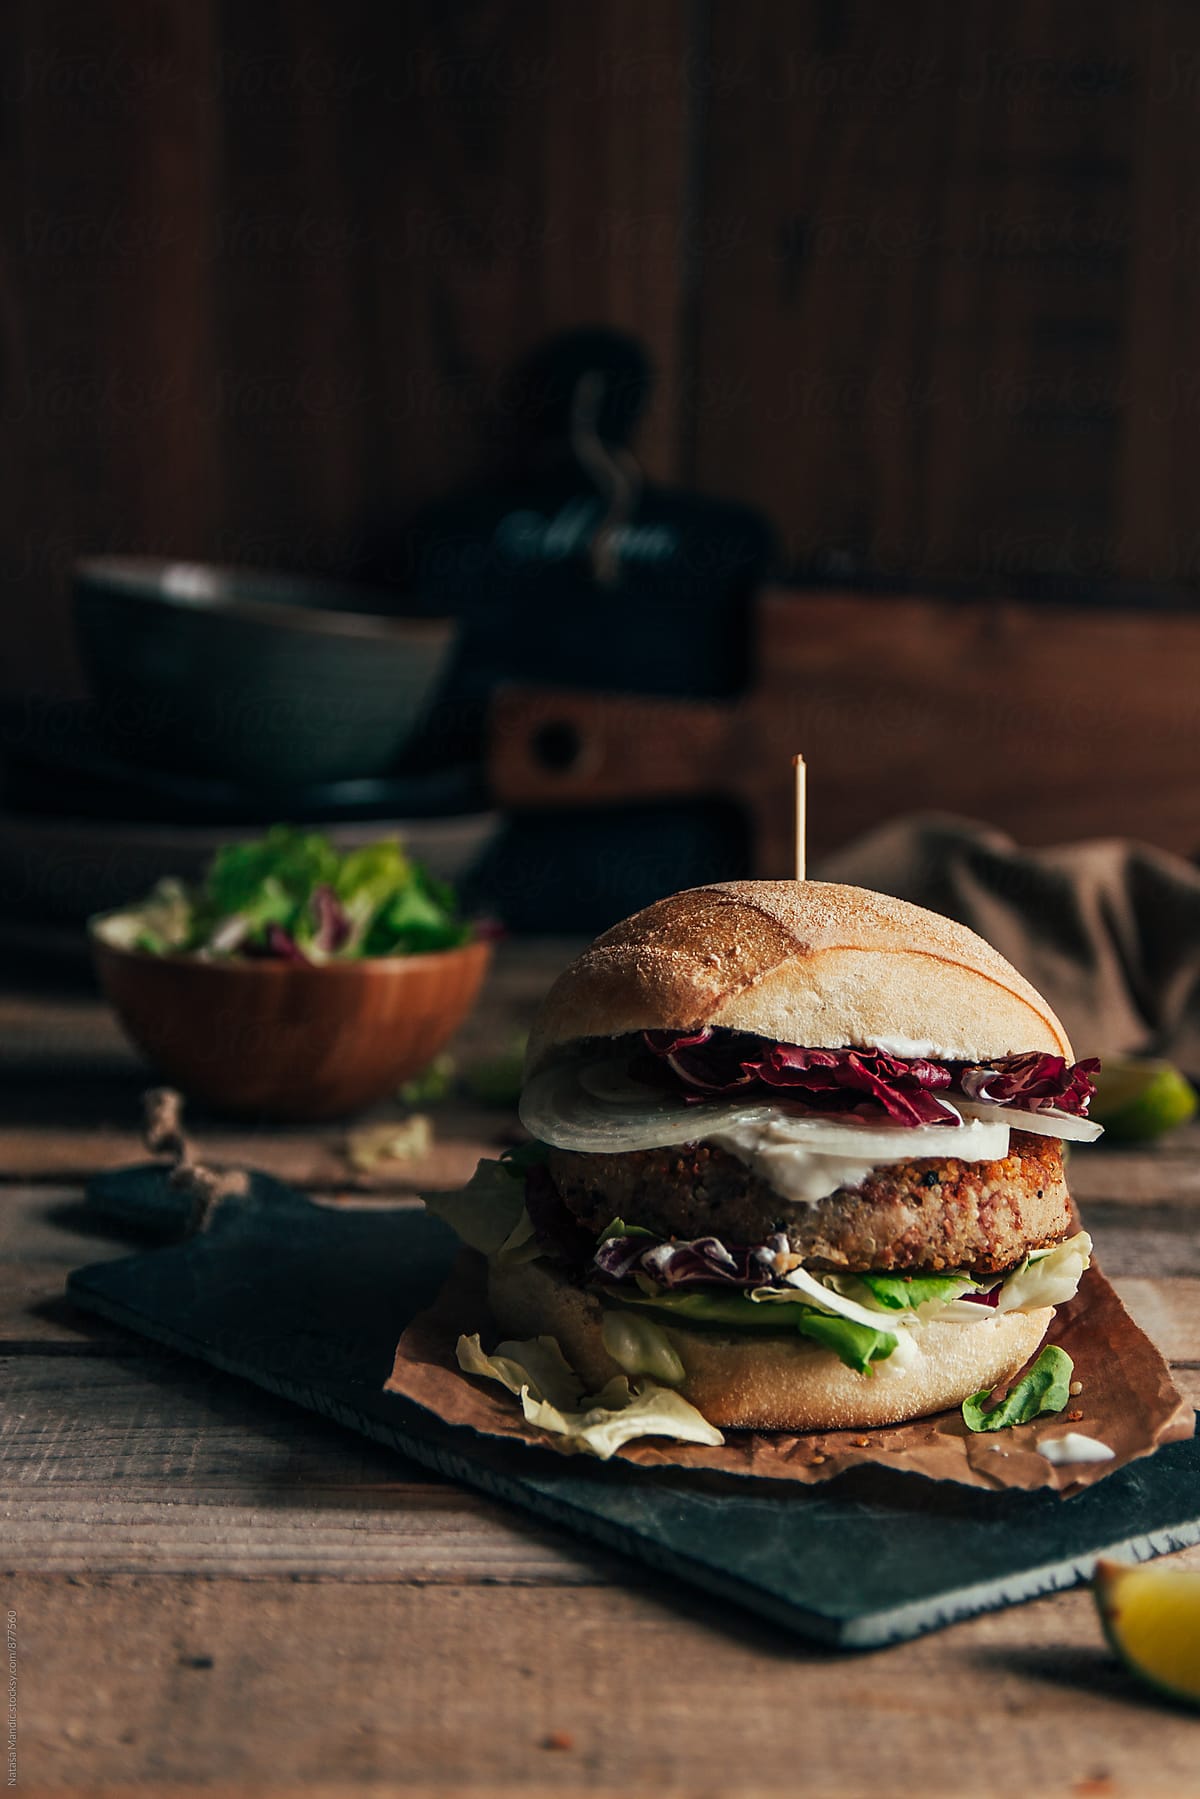 Quinoa burger with salad and onion